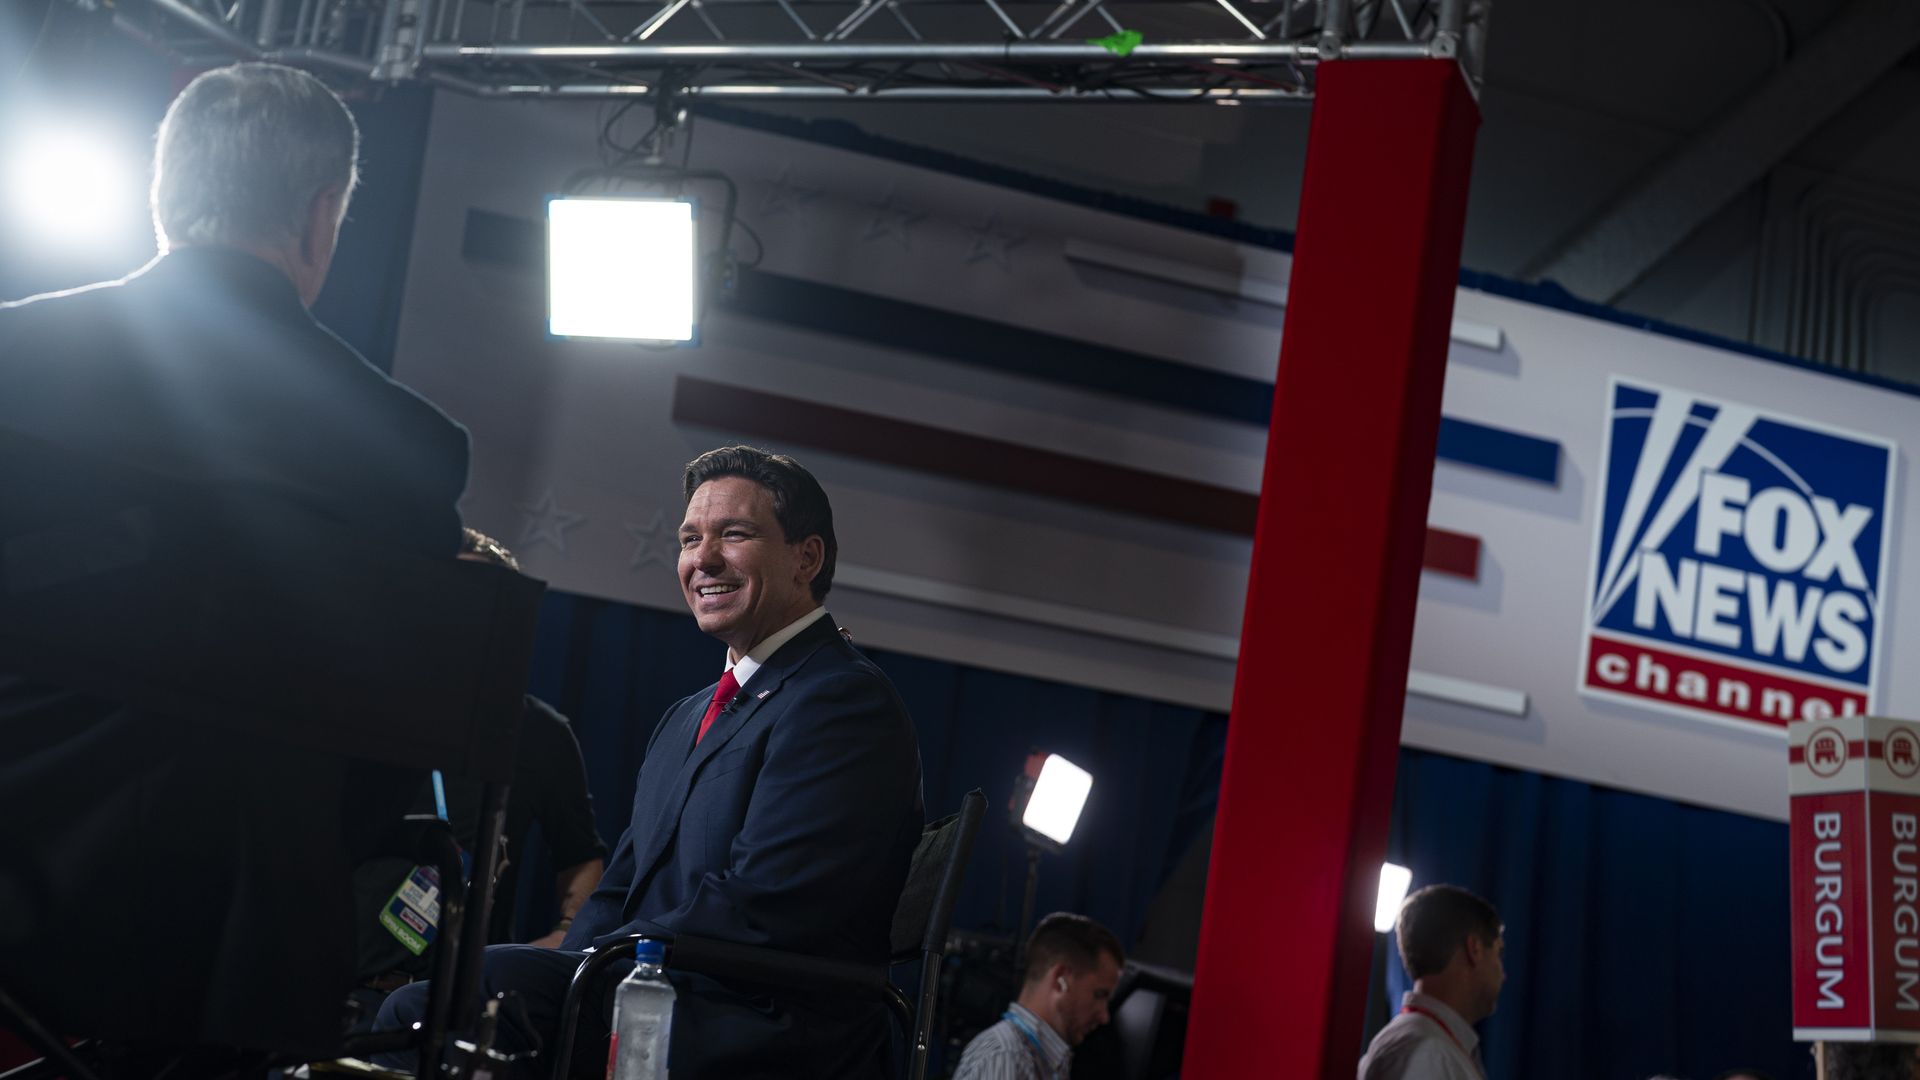 Ron DeSantis and Sean Hannity speak. Hannity's back is to the camera. DeSantis is smiling facing him. The FOX News logo is in the background. 